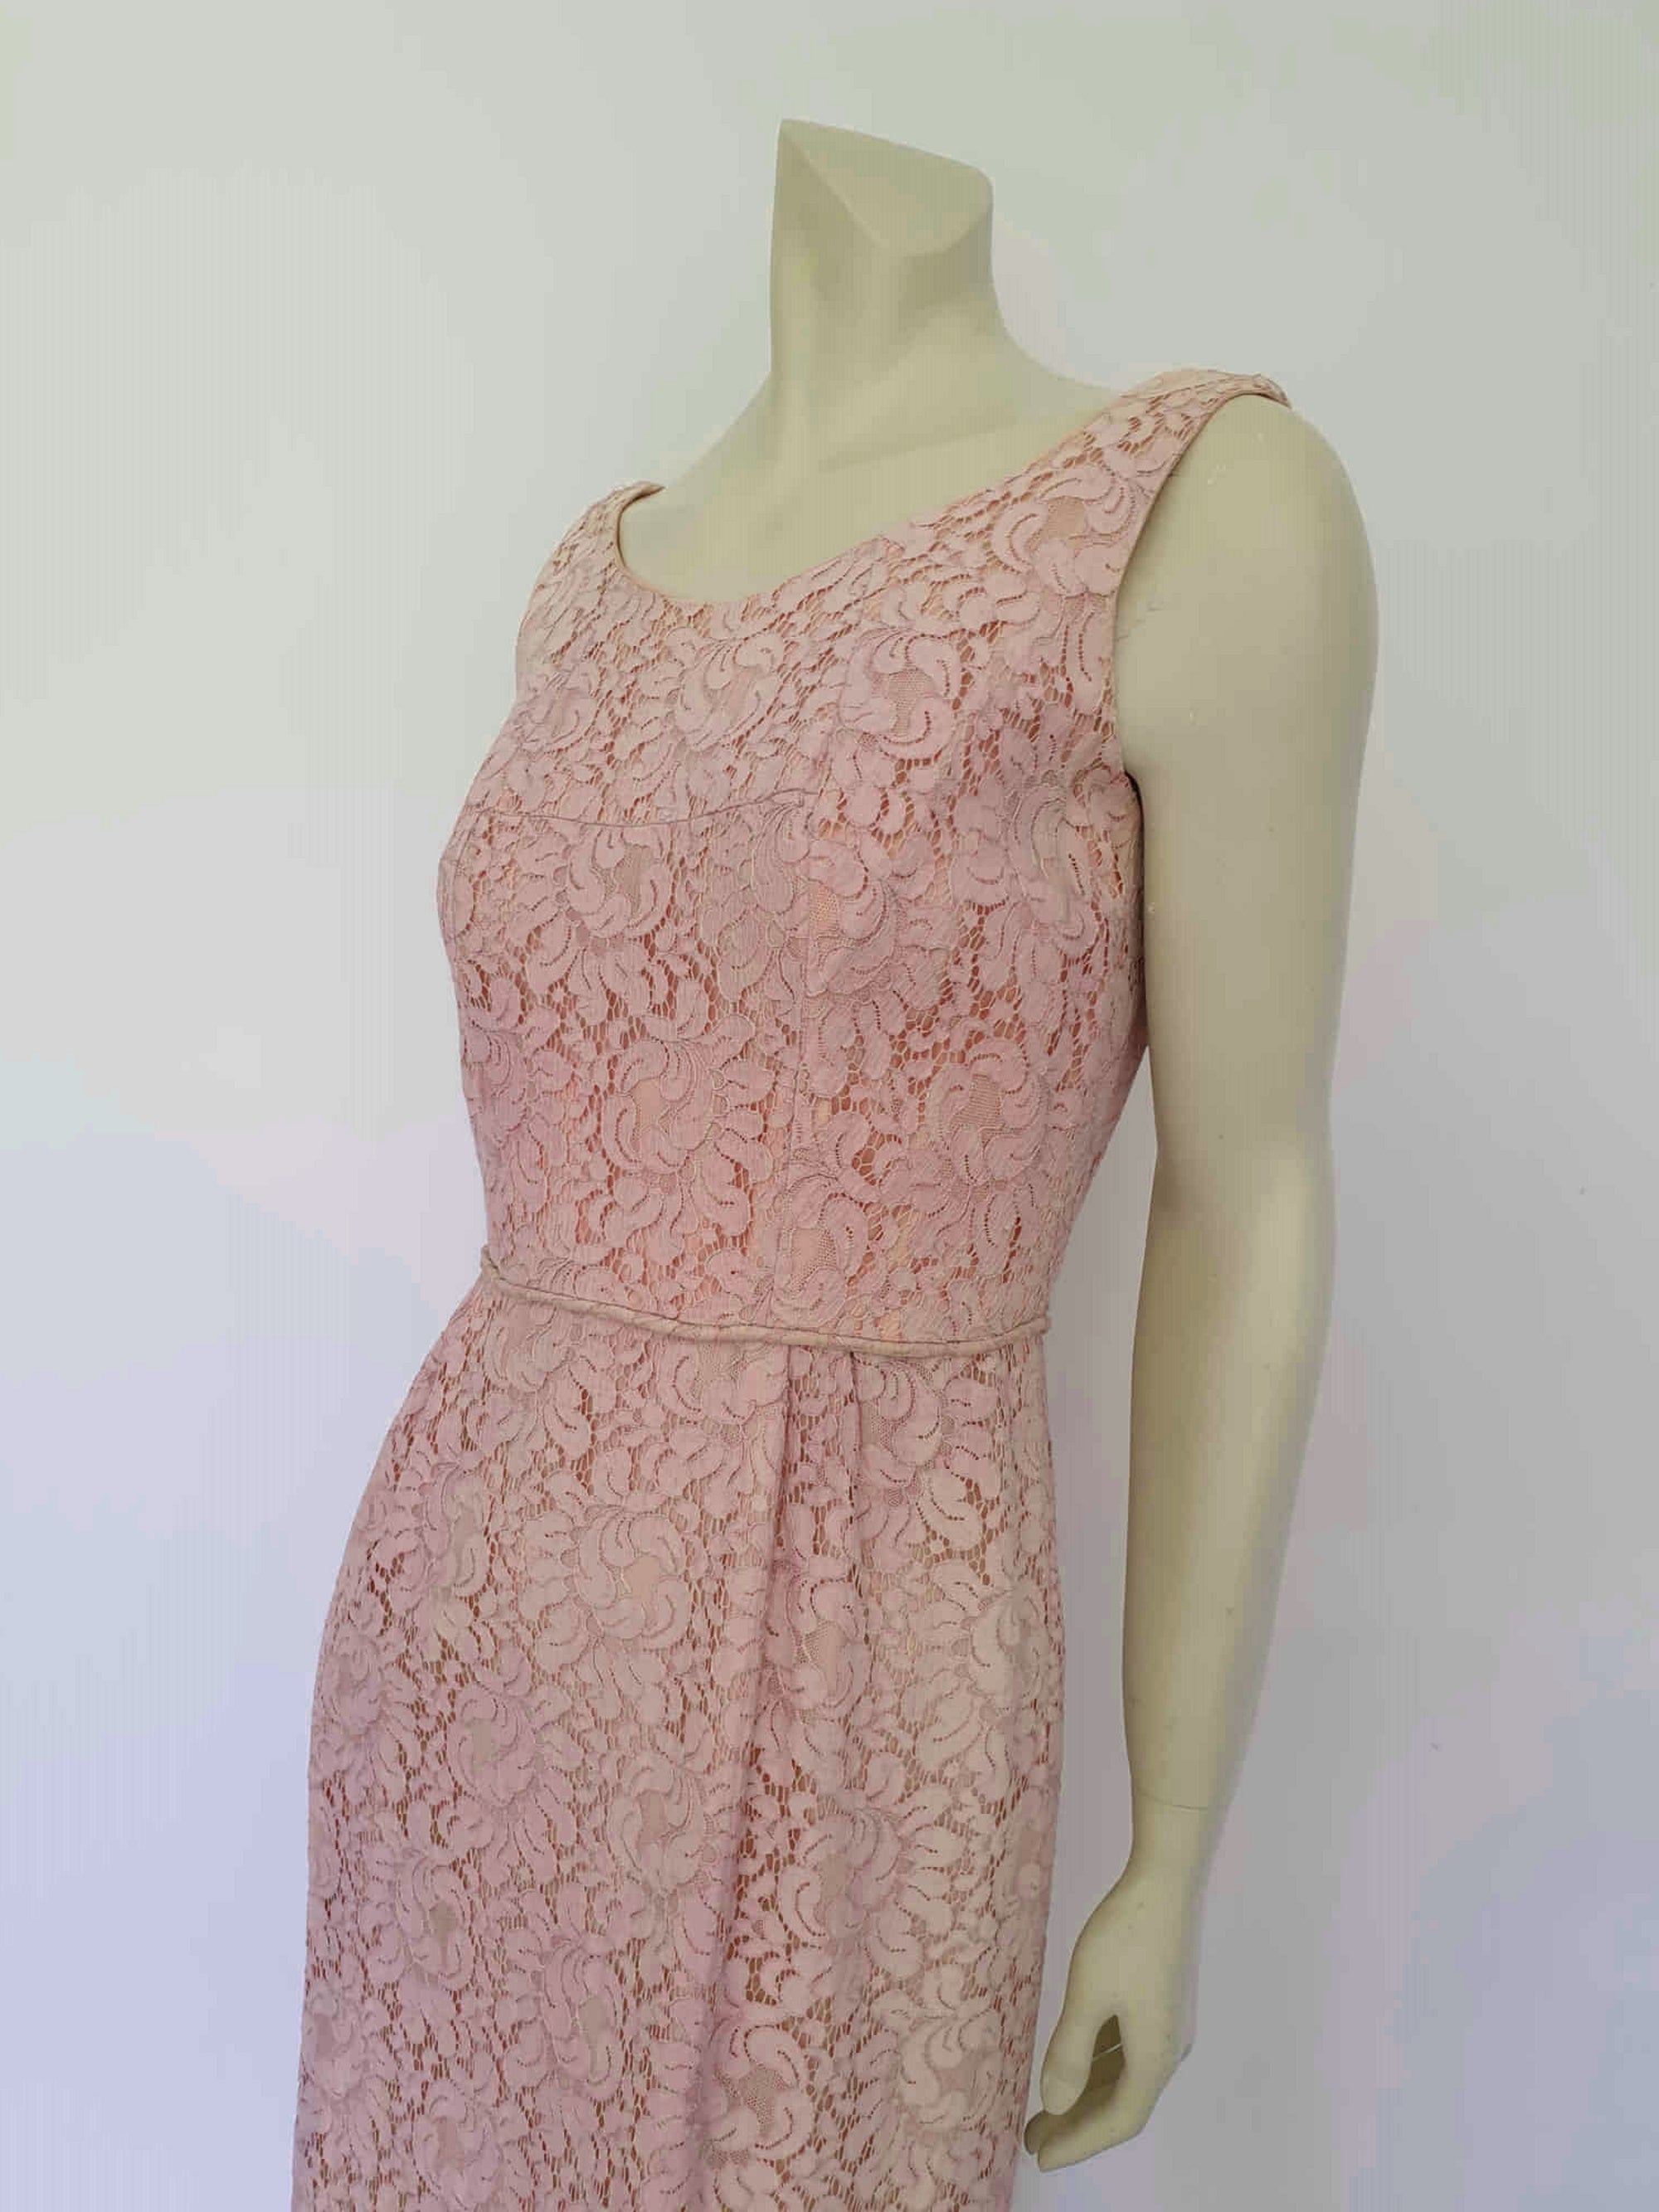 1960s vintage powder pink alencon lace cocktail dress with rear bows